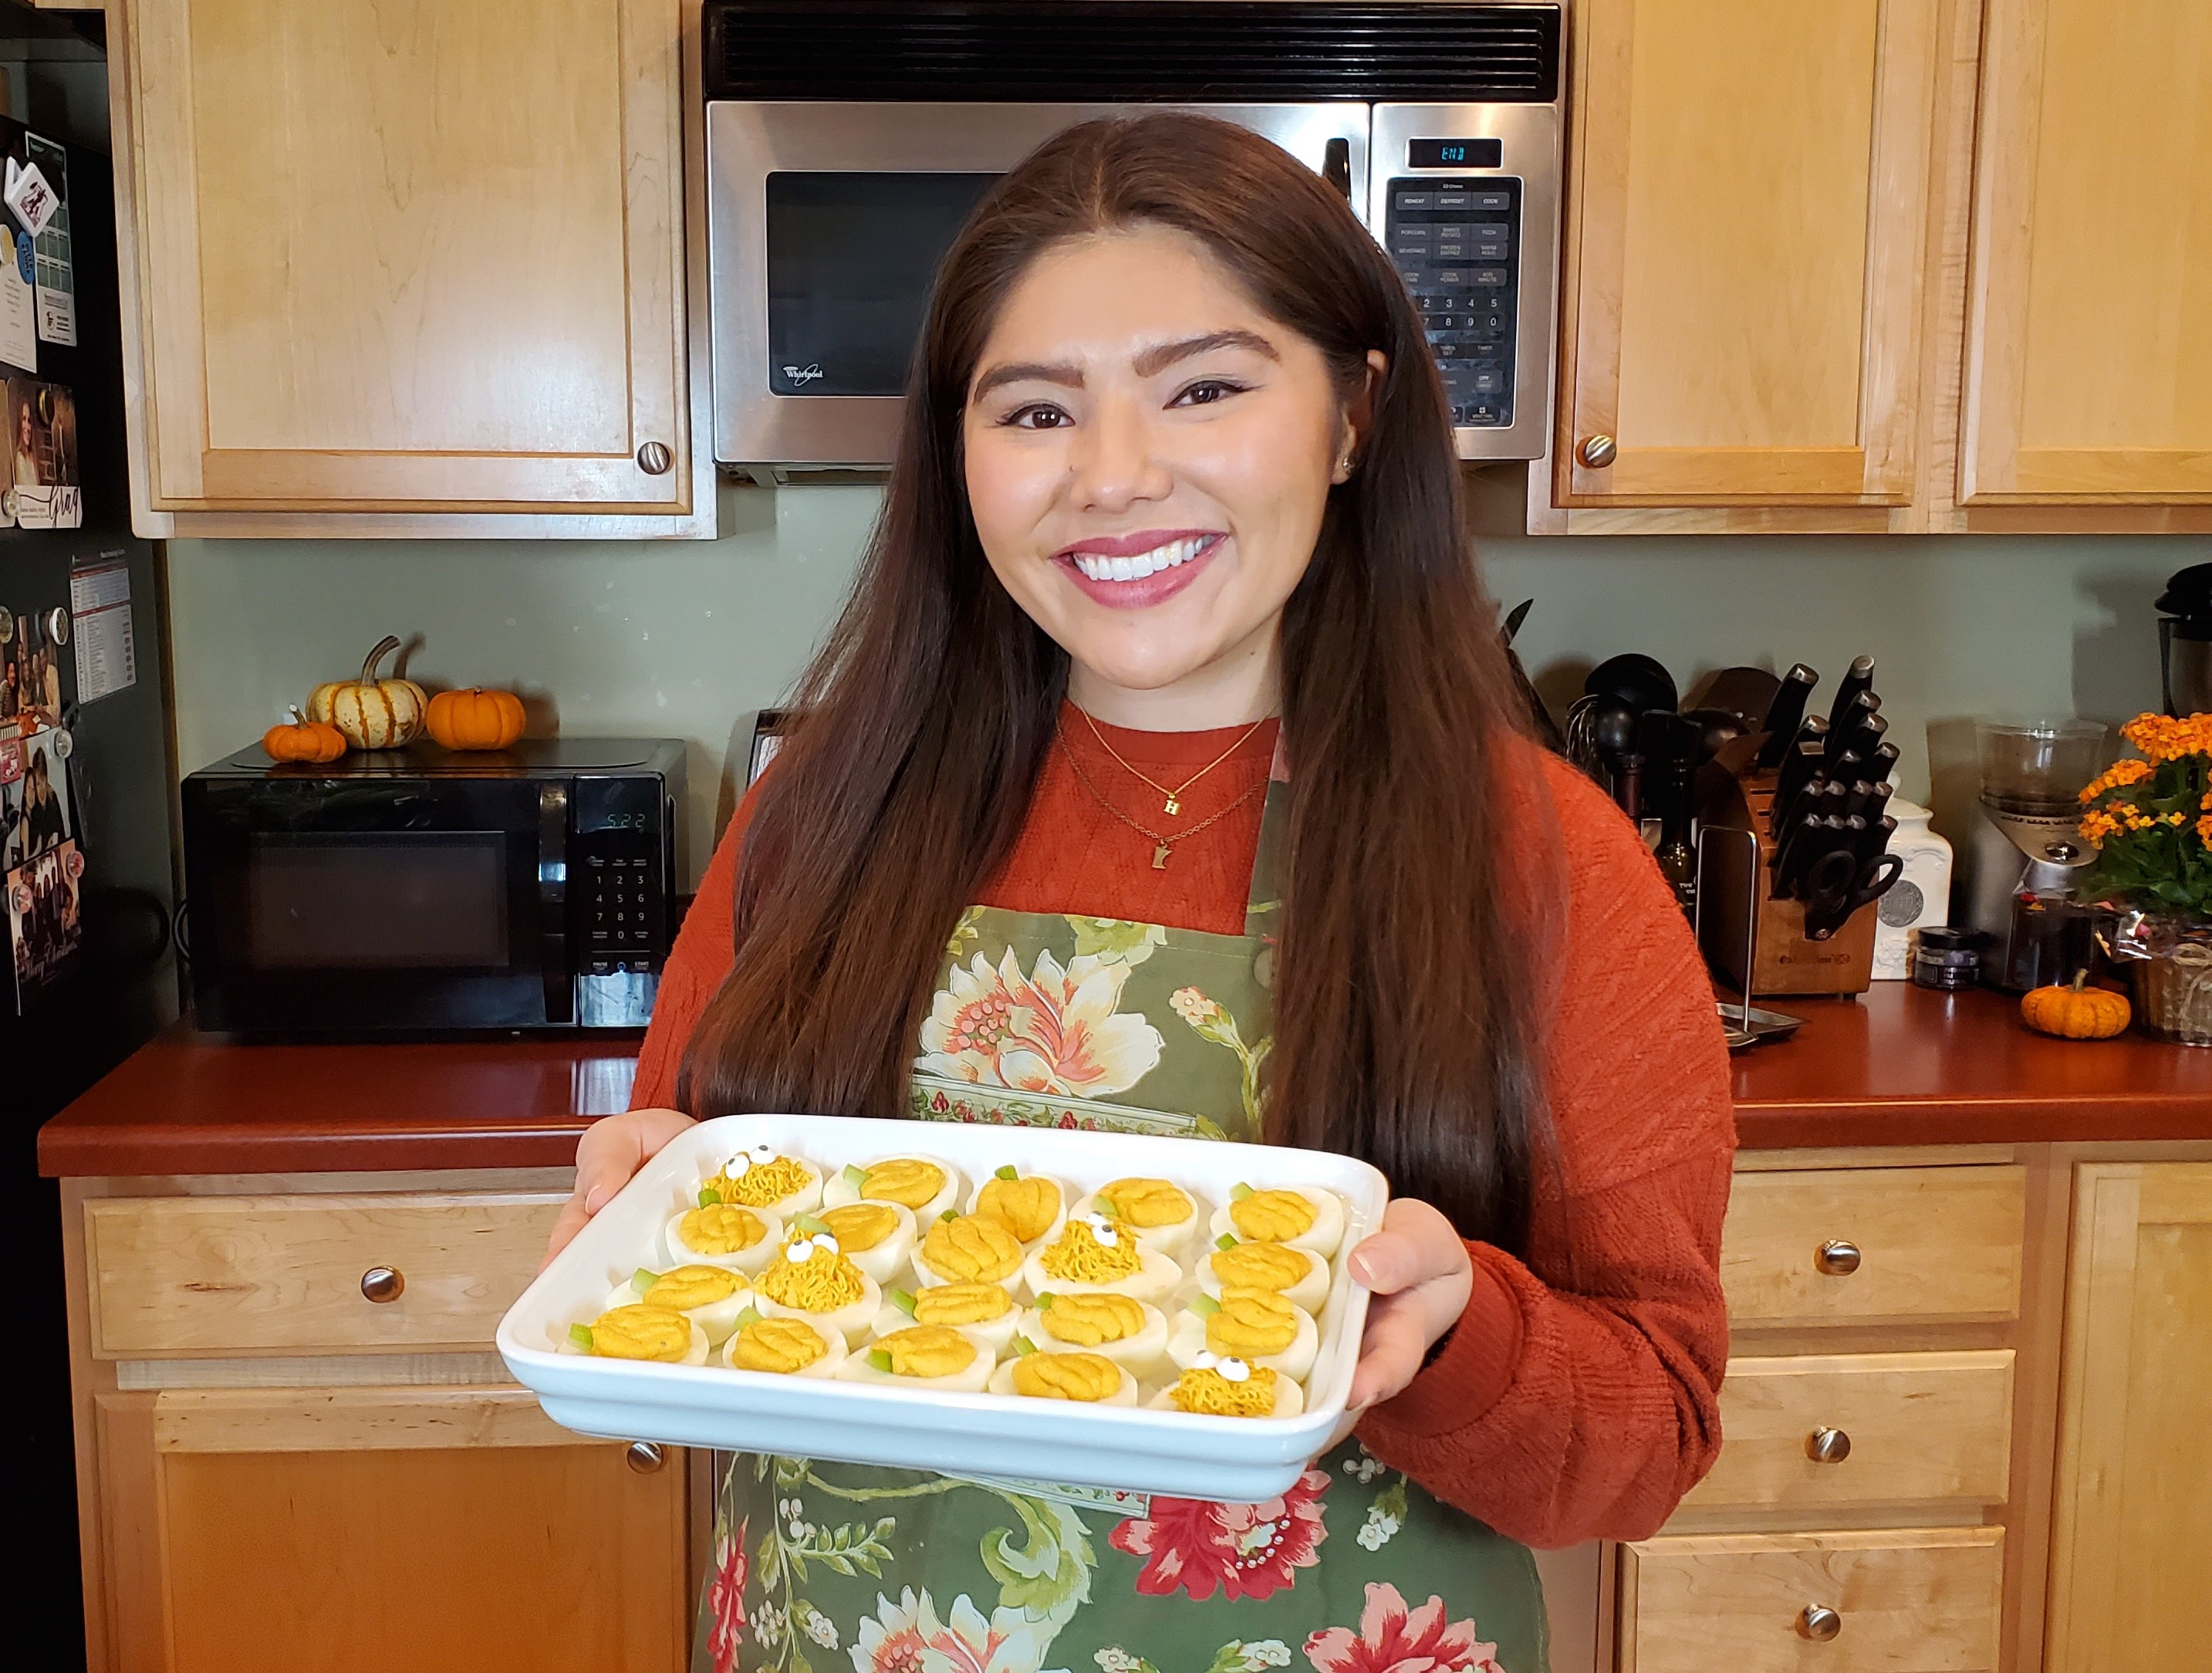 Lauren Hugh of hugh eats with you holding a white rectangular platter filled with hard boiled eggs in her kitchen. She wear a burnt orange knit sweater and a green and pink floral fall apron.